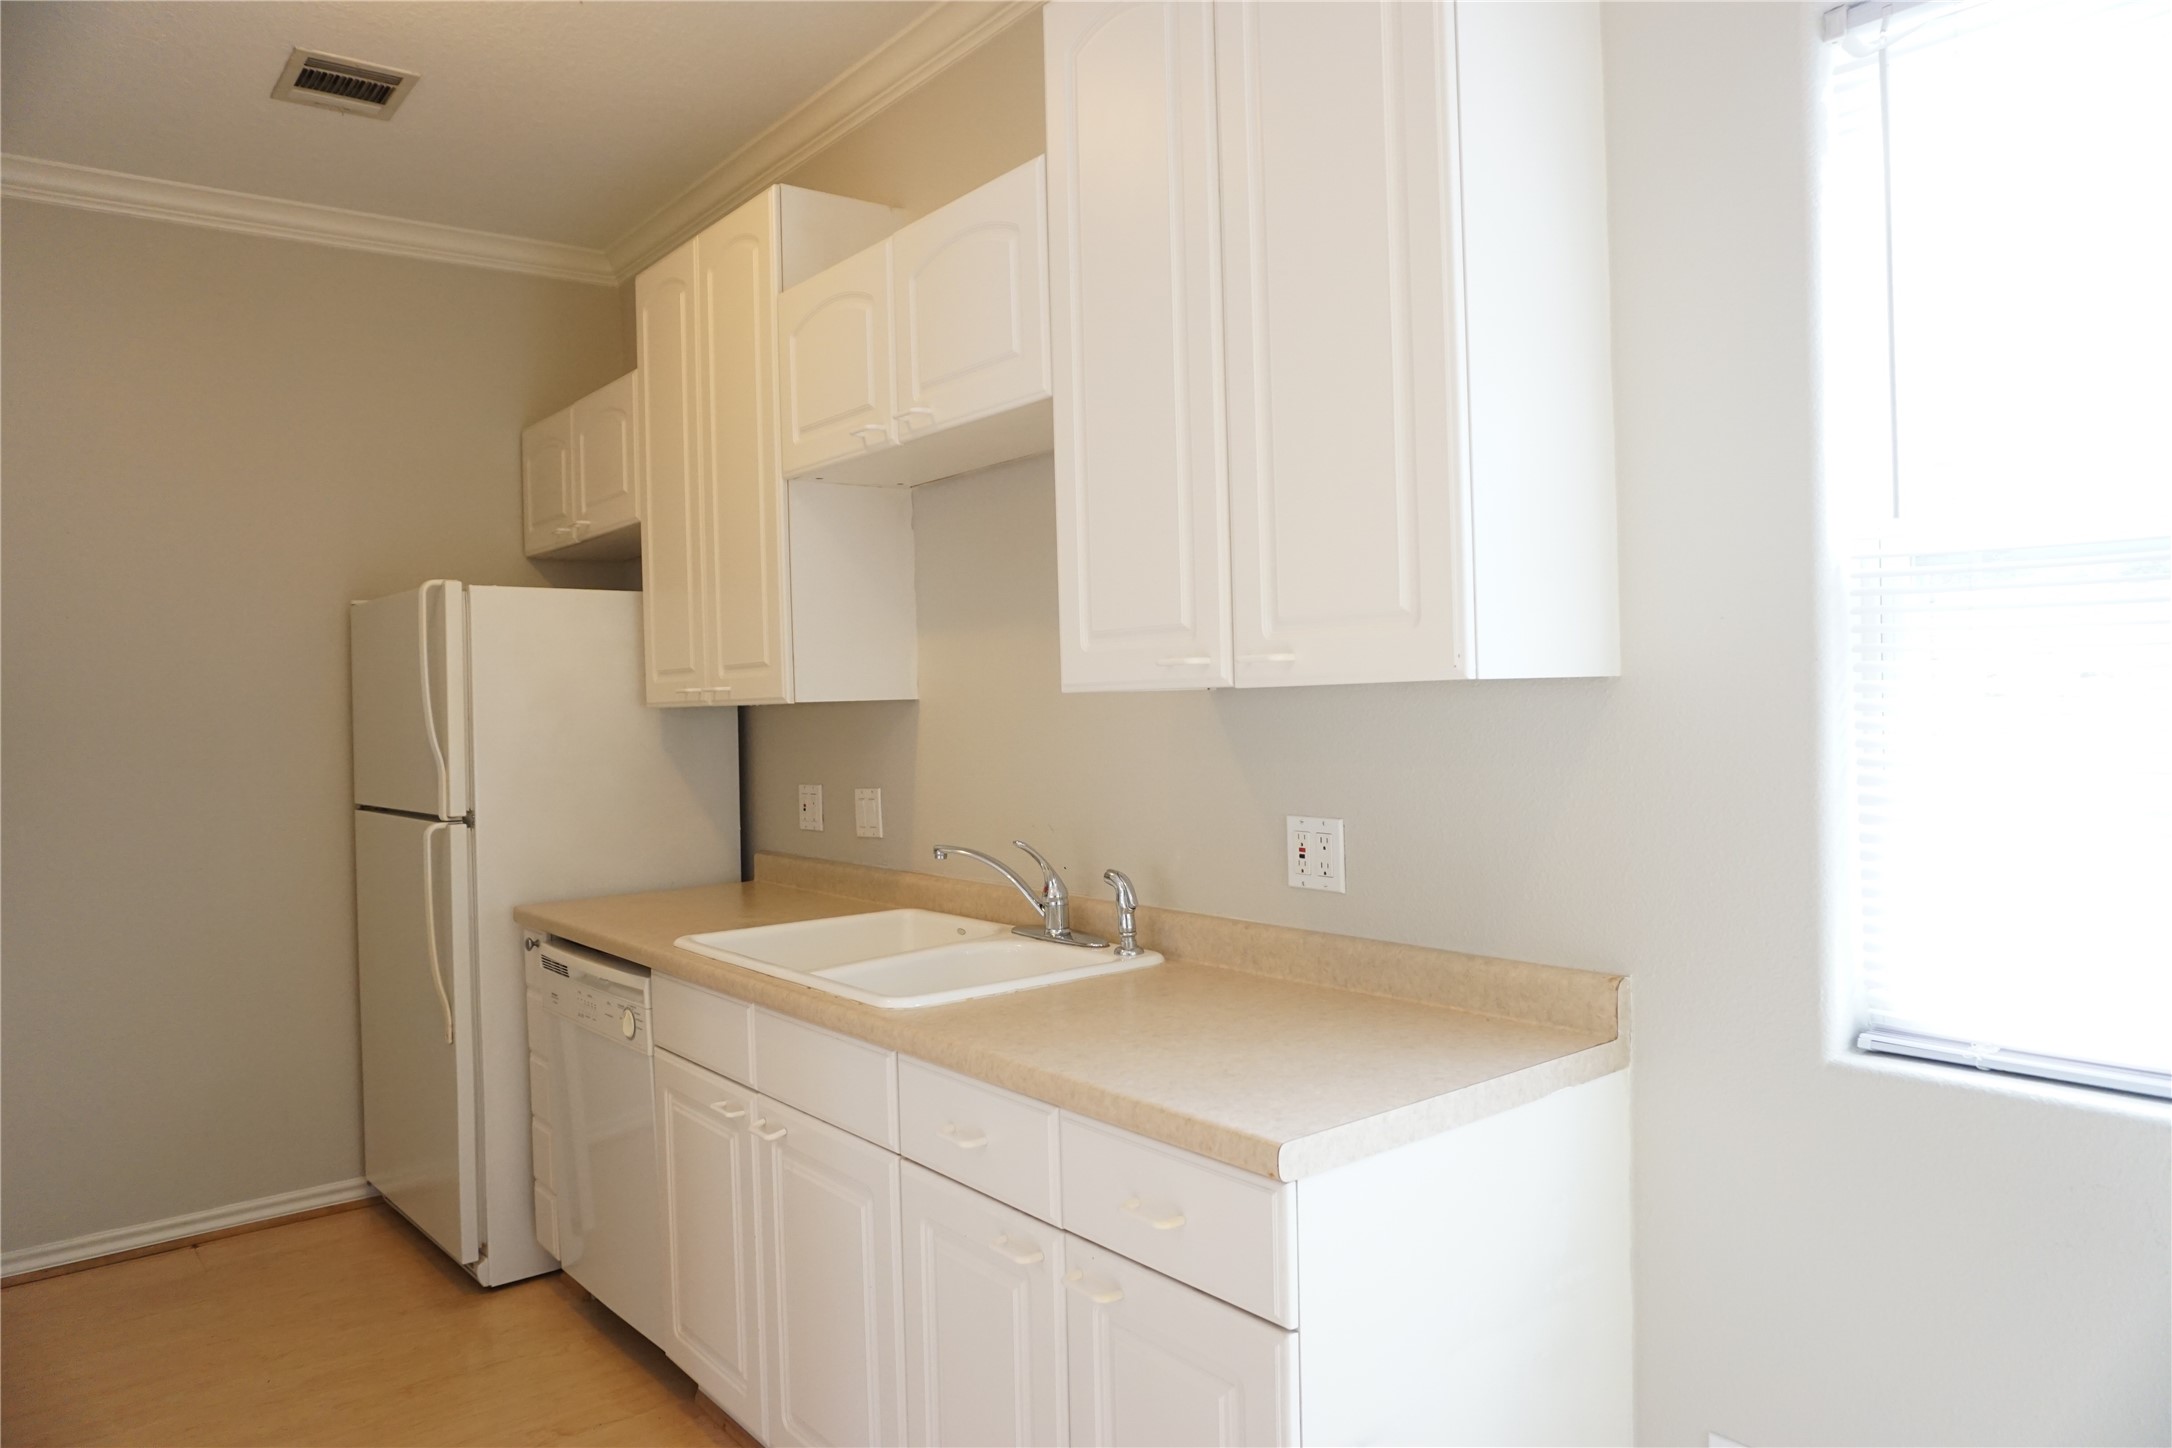 Garage unit Kitchen - If you have additional questions regarding 2612 Crocker Street  in Houston or would like to tour the property with us call 800-660-1022 and reference MLS# 80122077.